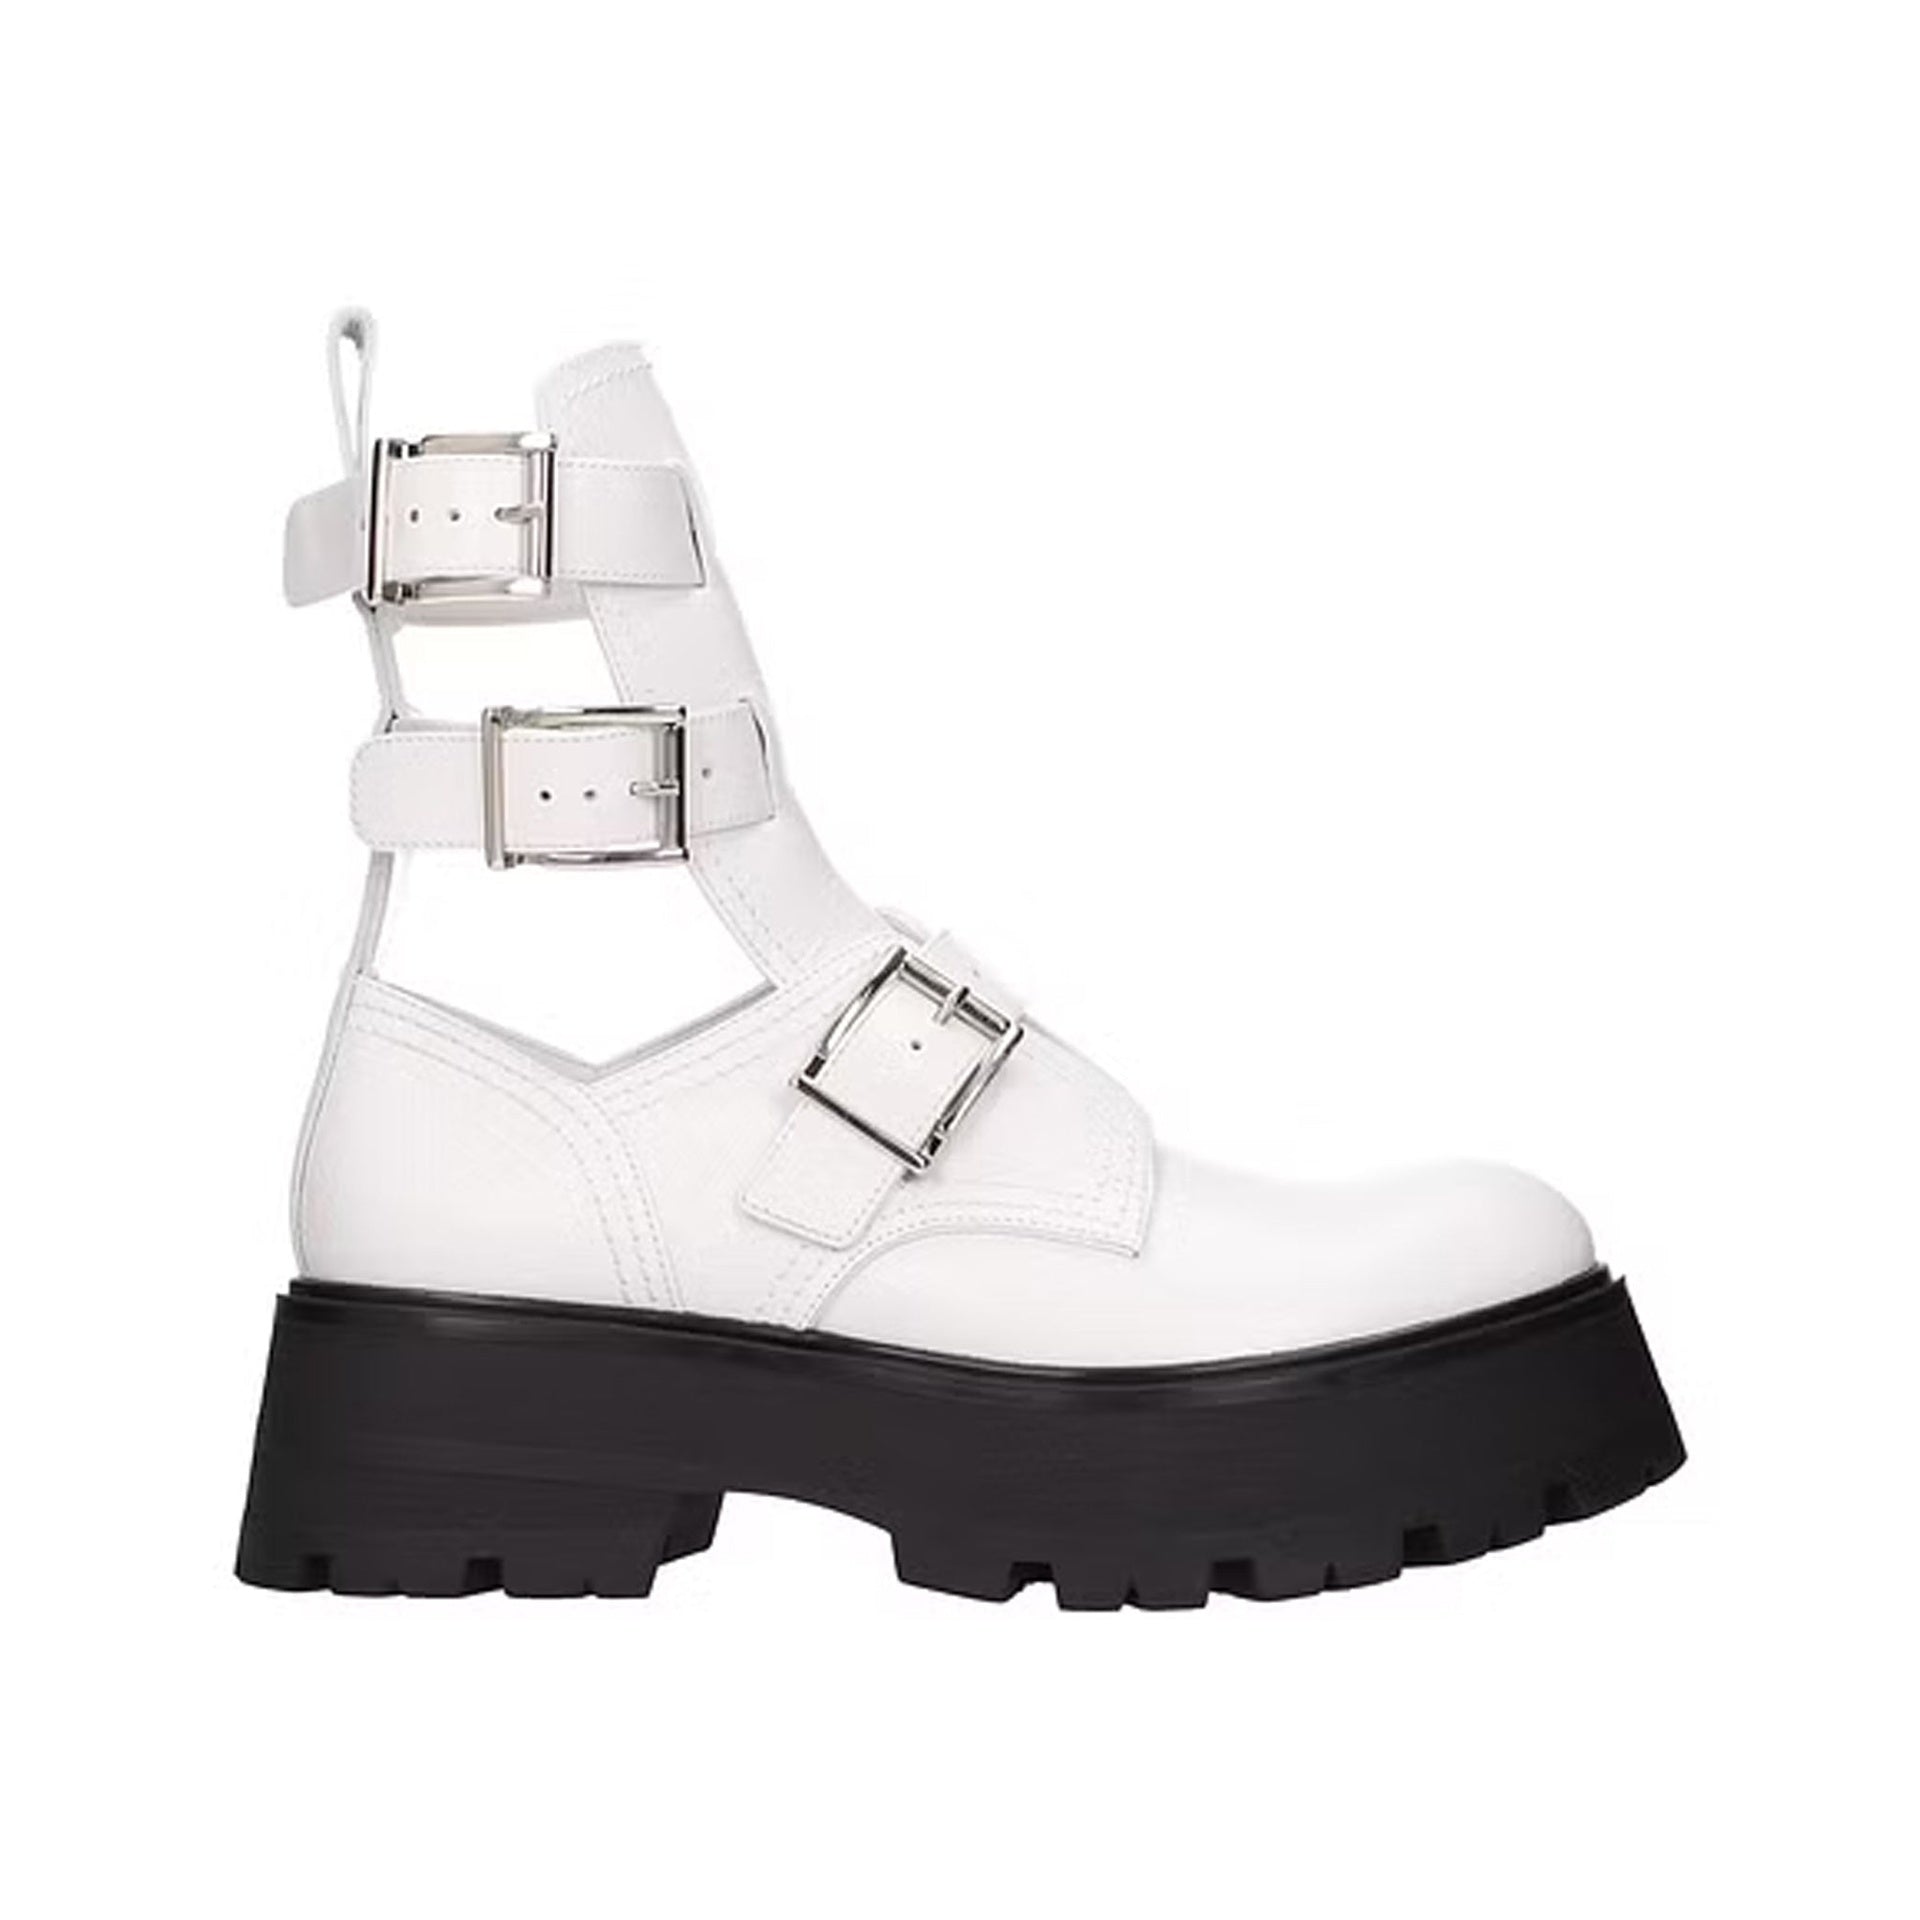 ALEXANDER-MCQUEEN-OUTLET-SALE-Alexander-Mcqueen-Leather-Ankle-Boots-Stiefel-Stiefeletten-WHITE-37_5-ARCHIVE-COLLECTION.jpg